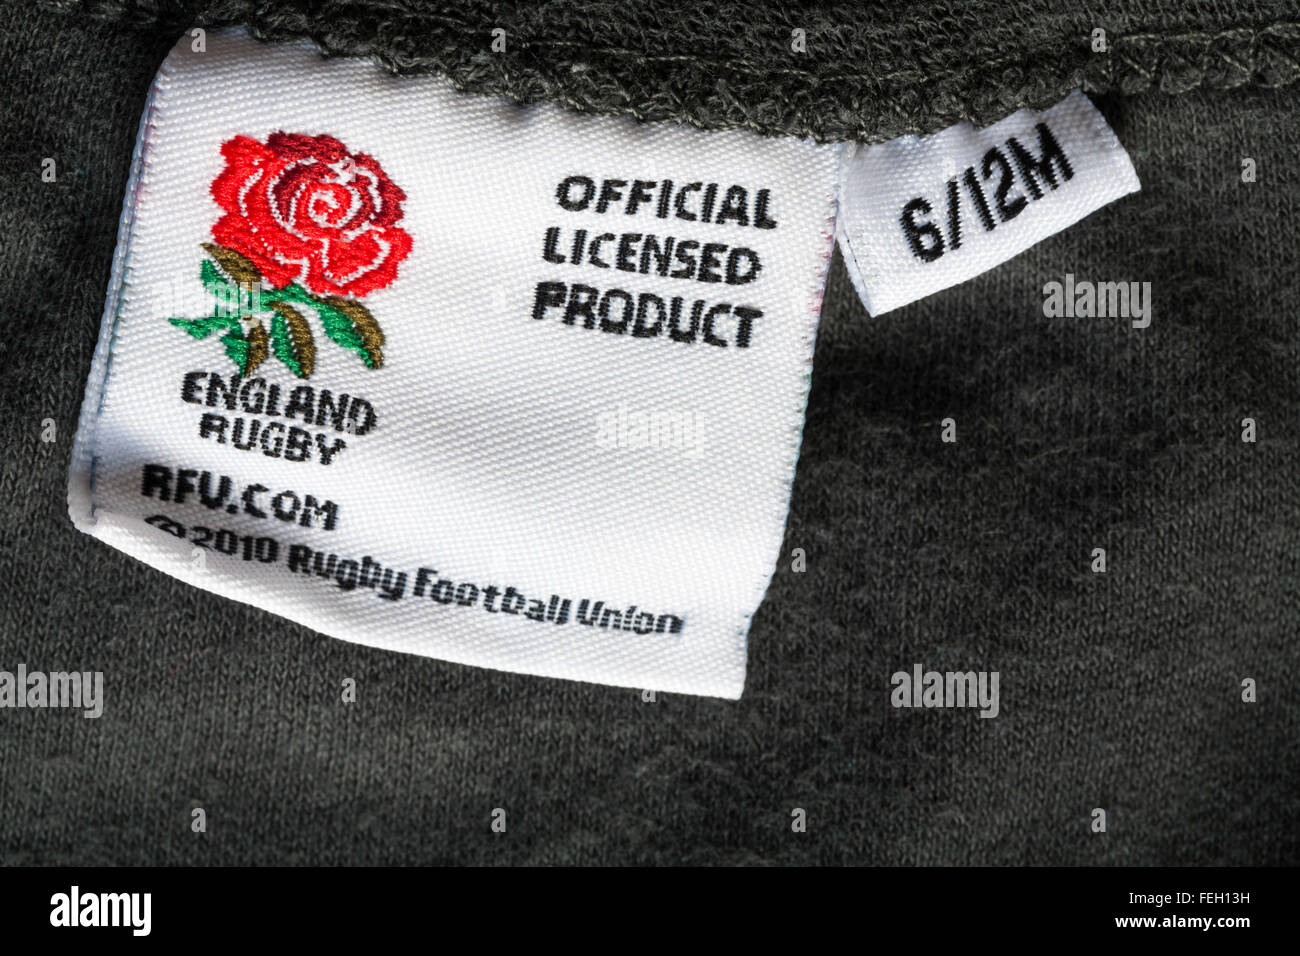 England Rugby official licensed product label in 6/12 m baby grow Stock Photo